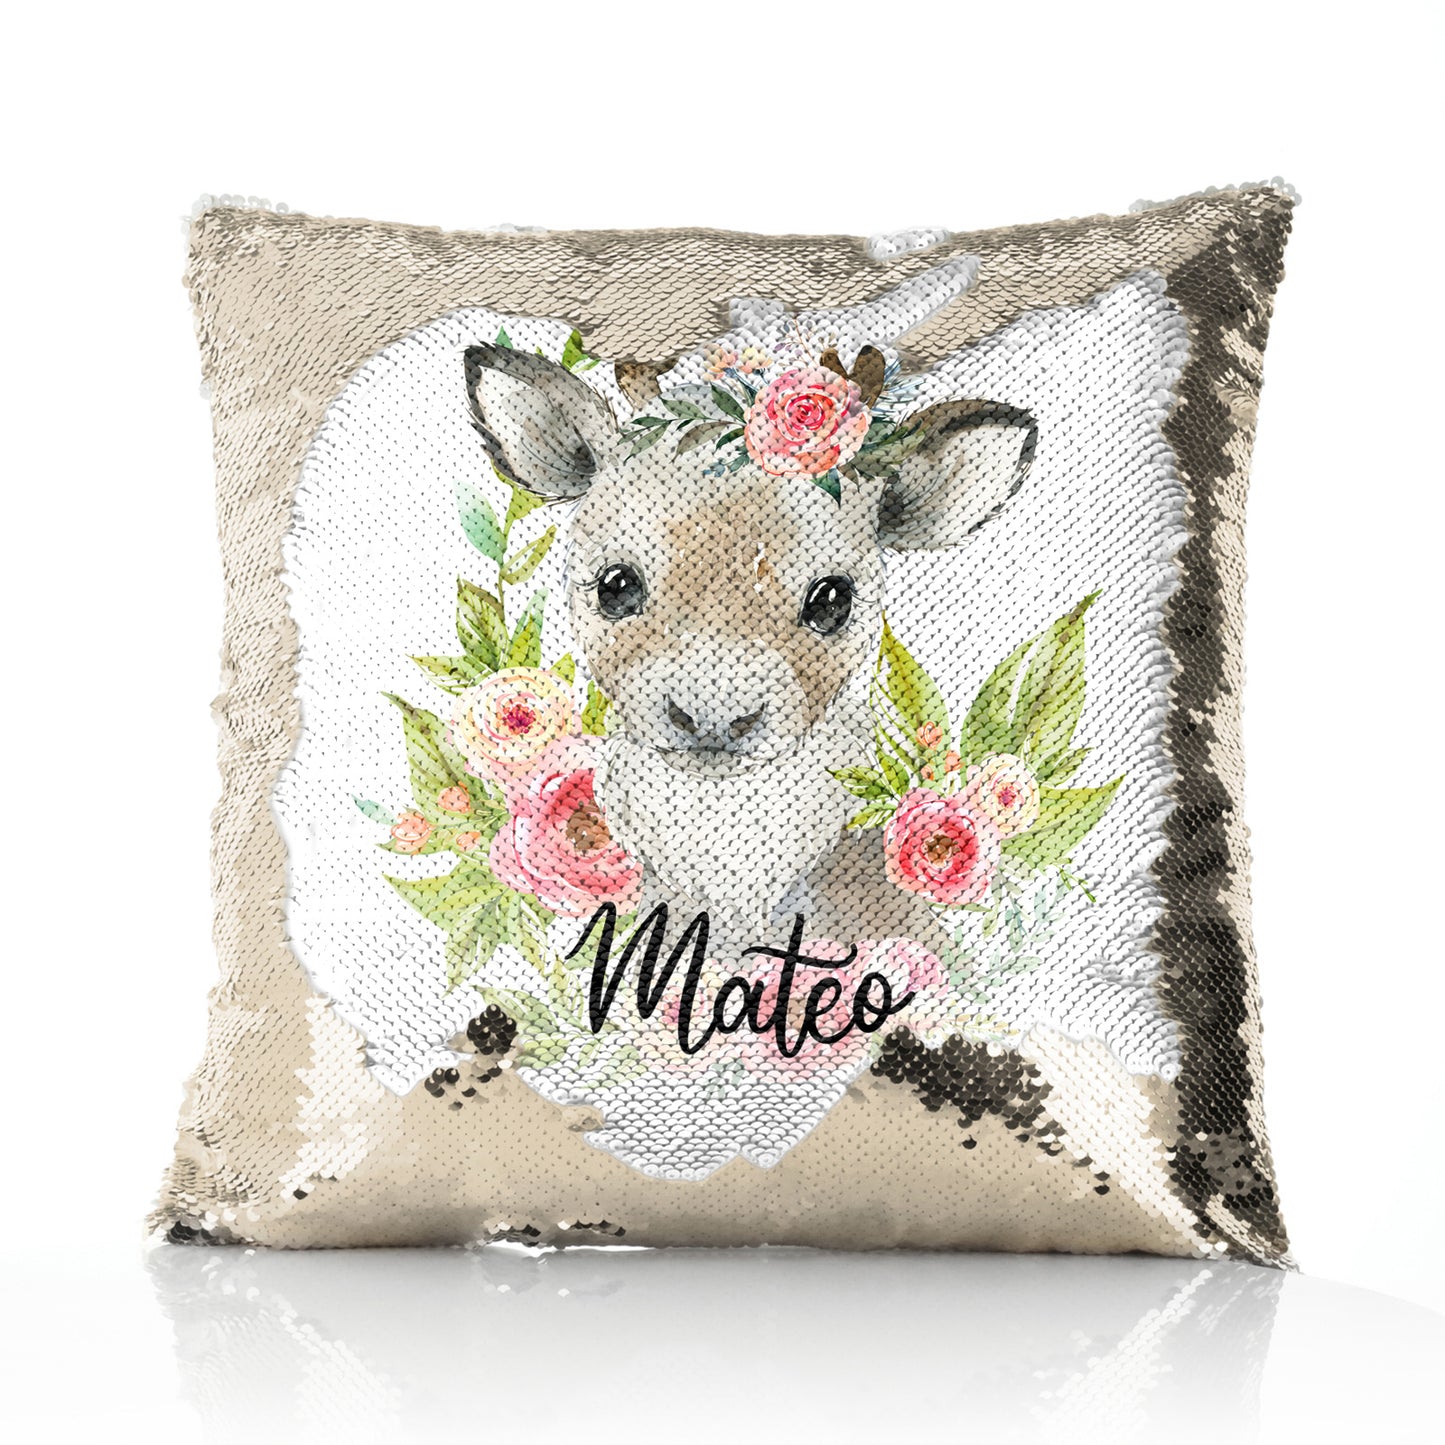 Personalised Sequin Cushion with Reindeer Pink Flowers and Cute Text